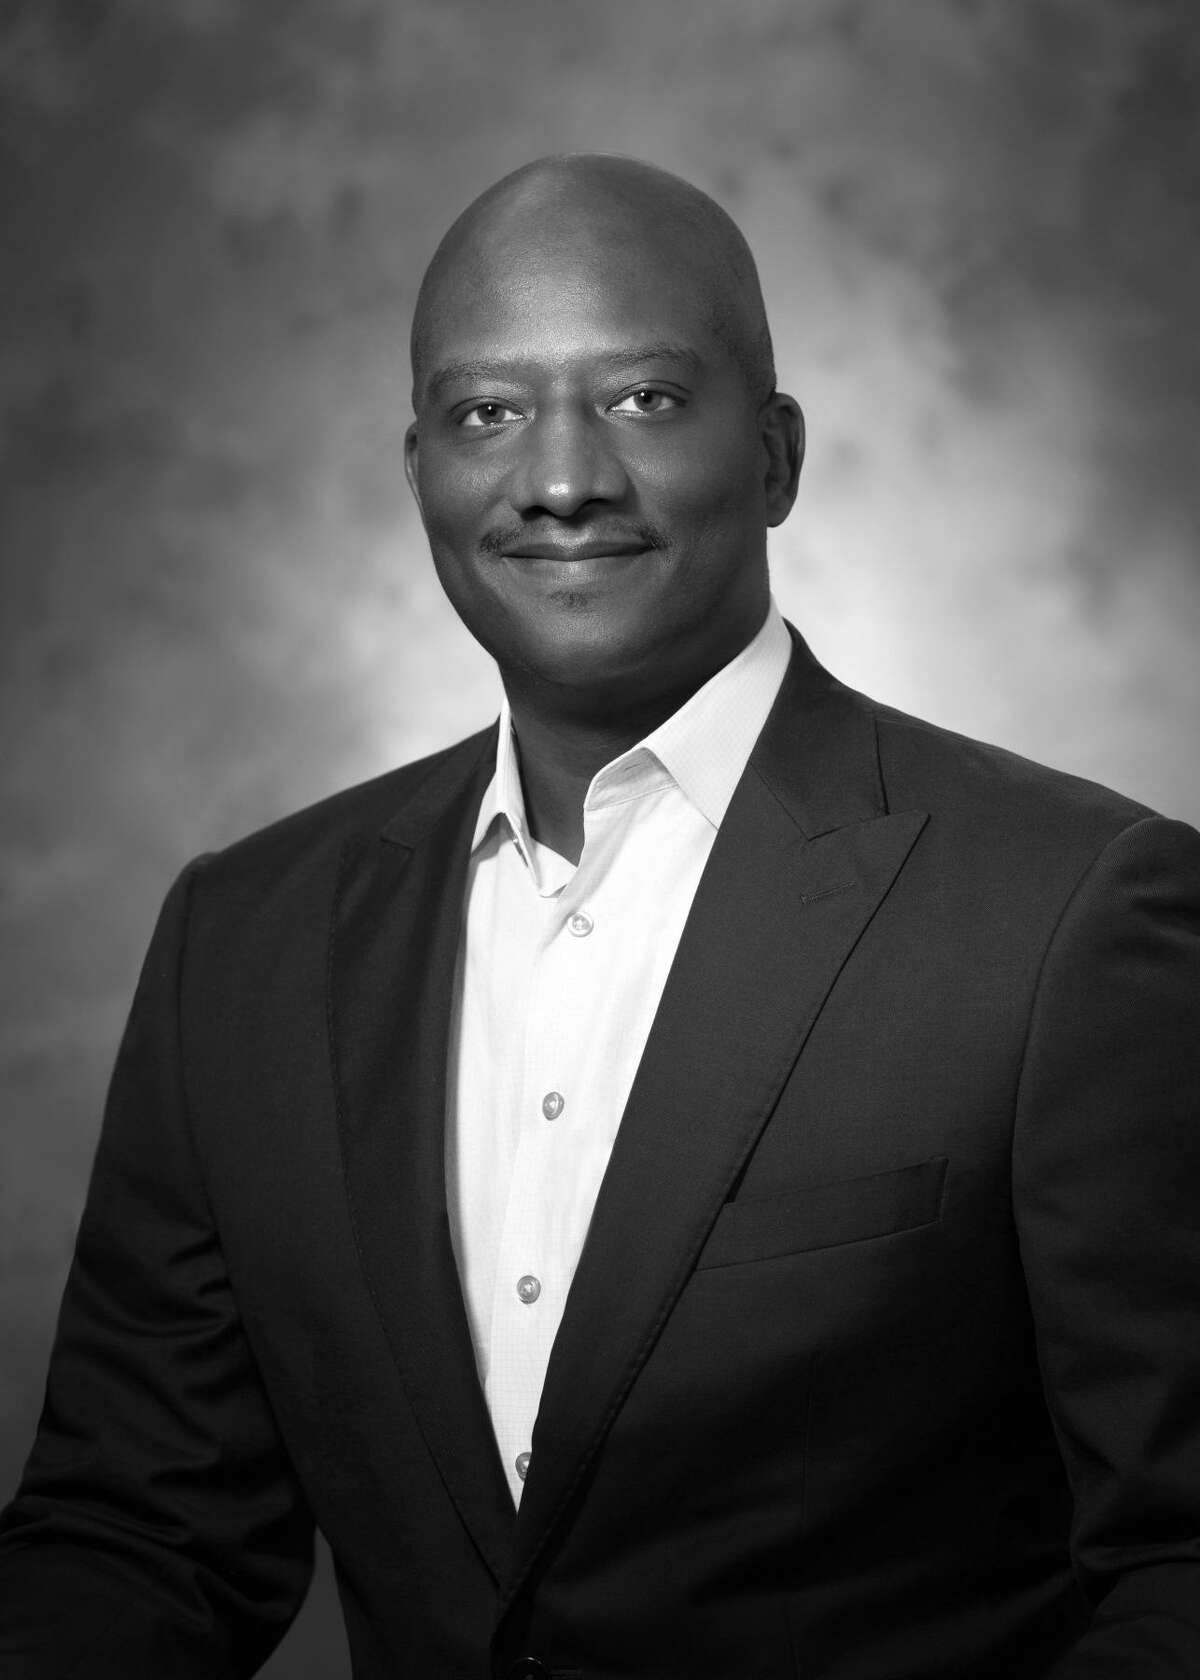 Derrick Mitchell, partner with Bracewell, has been elected chairman of the board of directors of Scenic Houston for a two-year term.